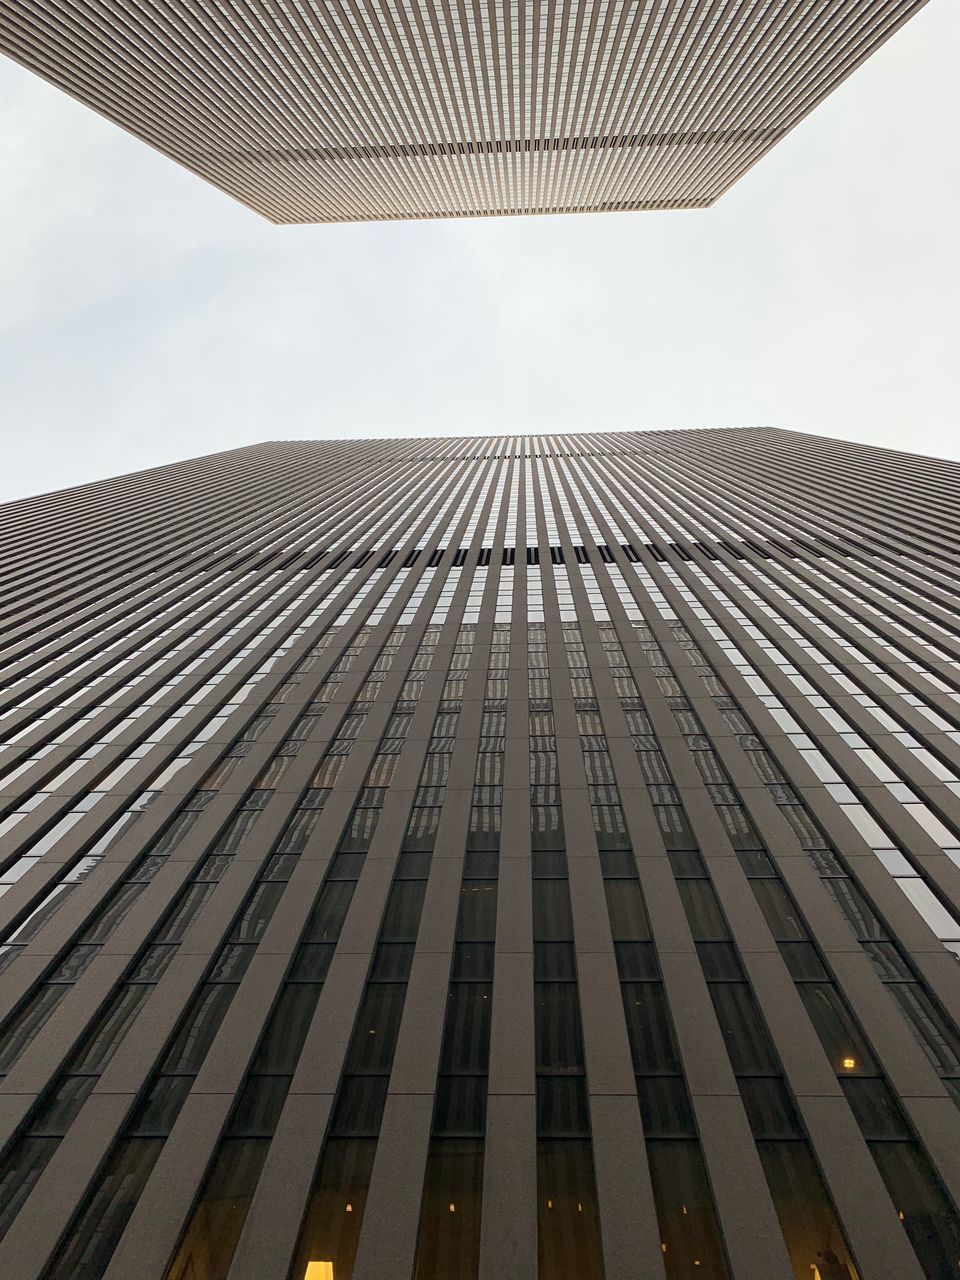 built structure, architecture, building exterior, low angle view, sky, building, tall - high, modern, city, office, office building exterior, no people, skyscraper, day, pattern, nature, tower, clear sky, outdoors, directly below, financial district